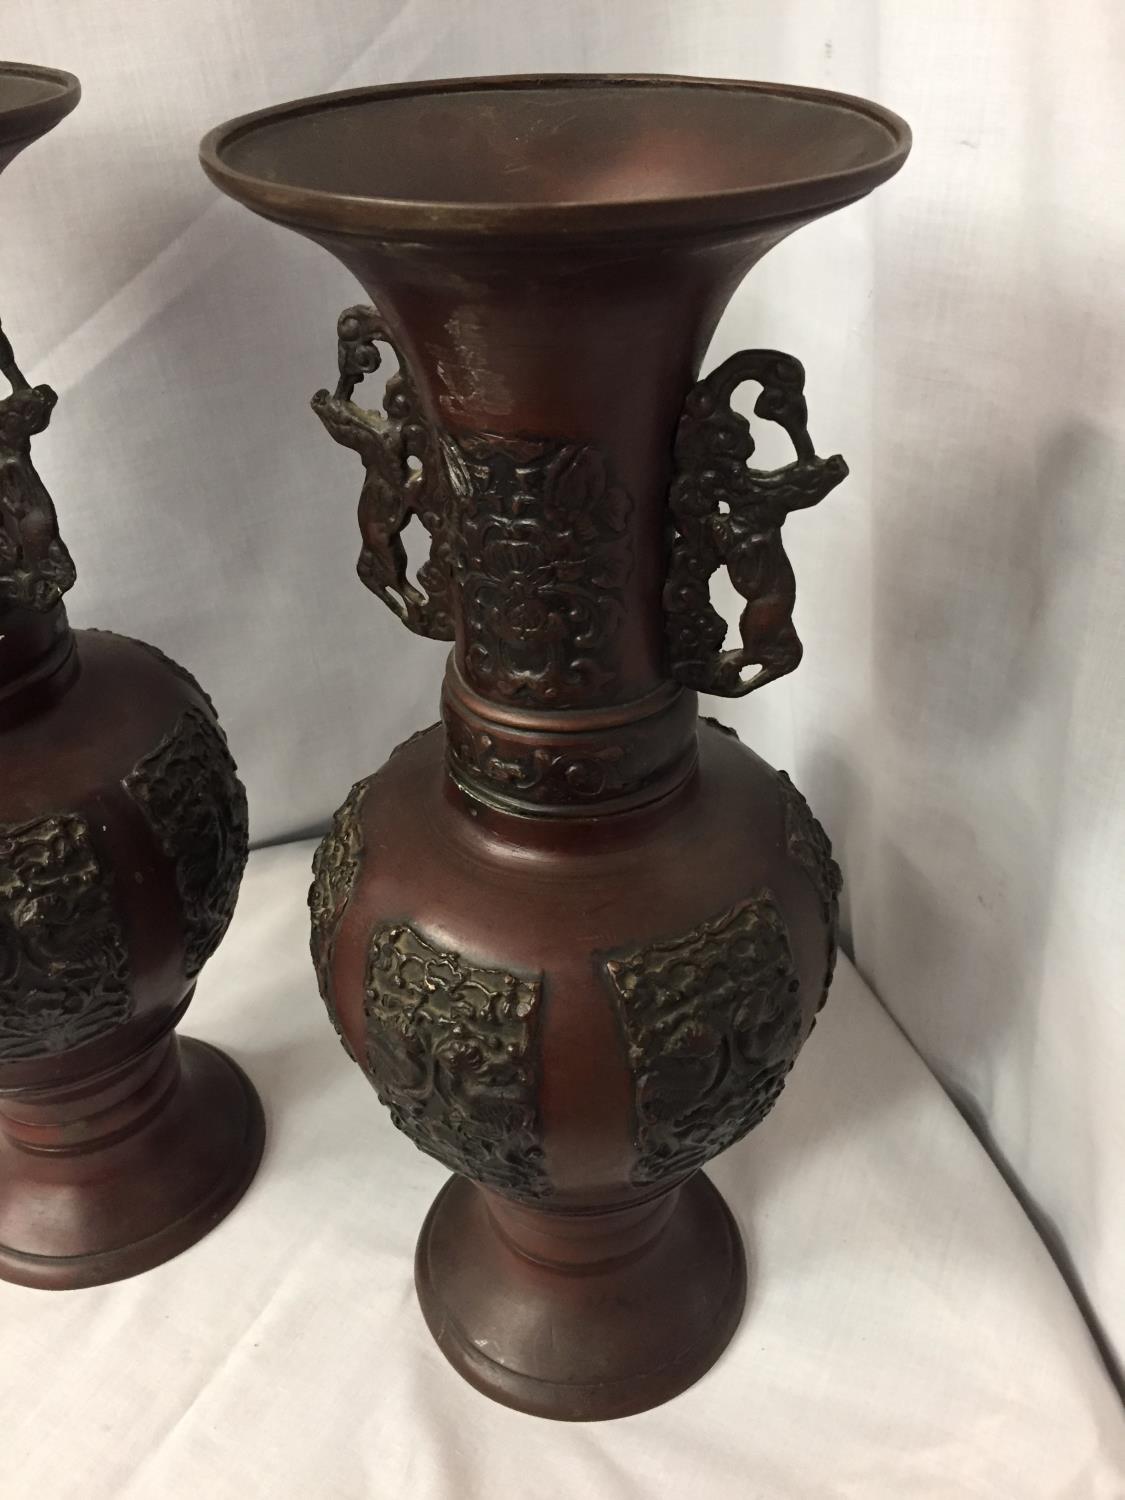 TWO DECORATIVE BRONZE URNS, ONE TOP NEEDS RE-AFFIXING, ONE MISSING HANDLE 38CM HIGH - Image 3 of 4